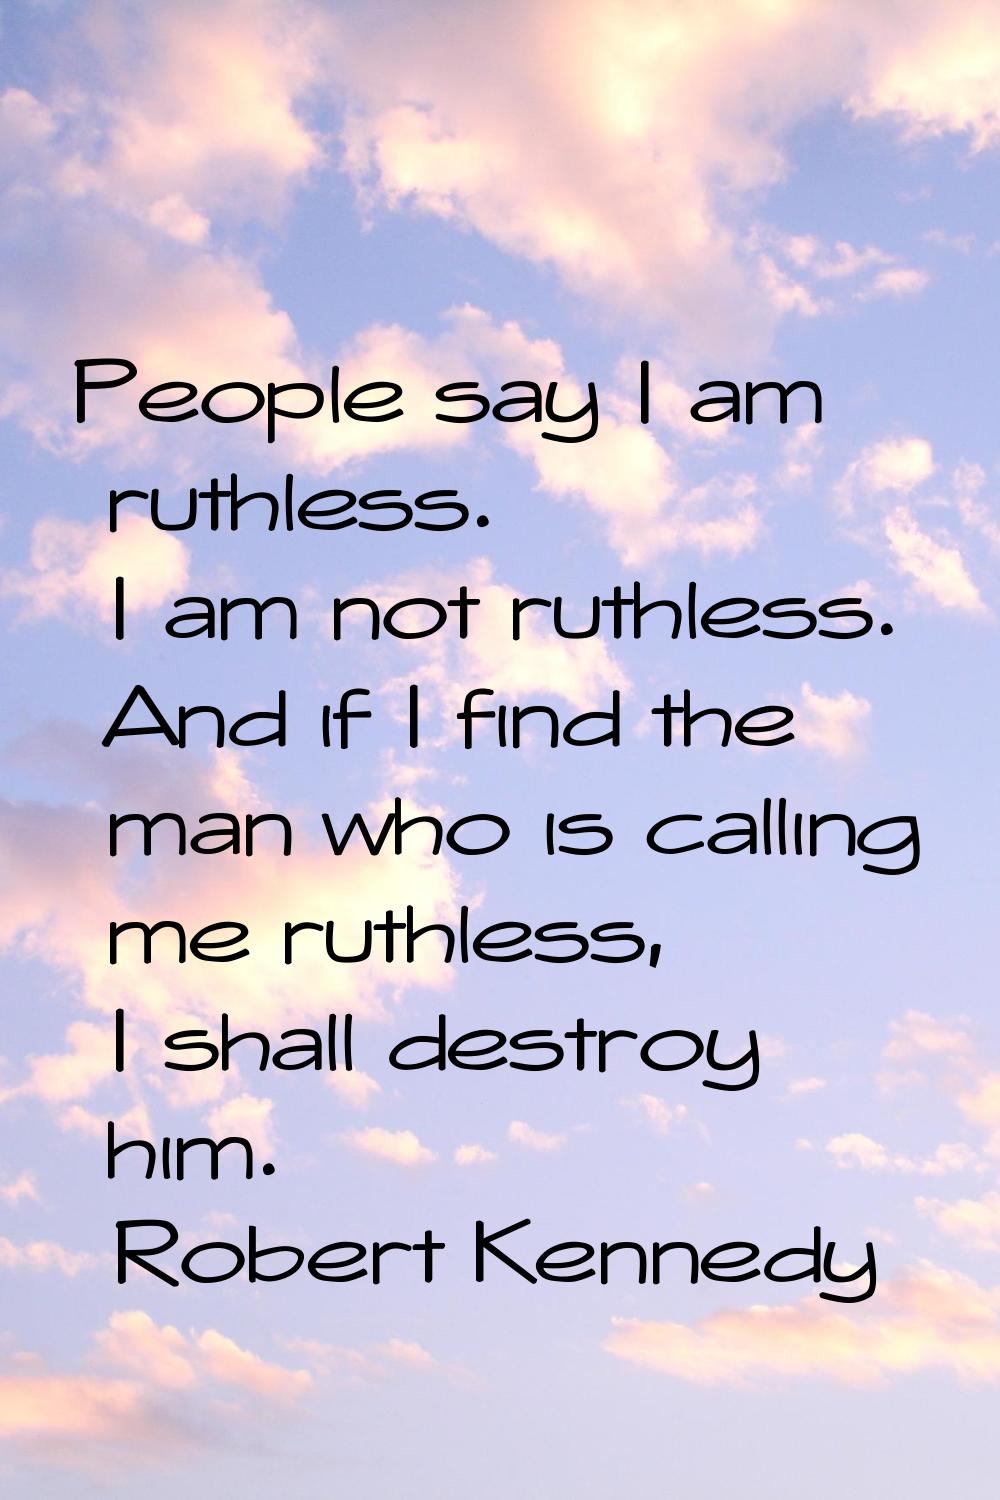 People say I am ruthless. I am not ruthless. And if I find the man who is calling me ruthless, I sh